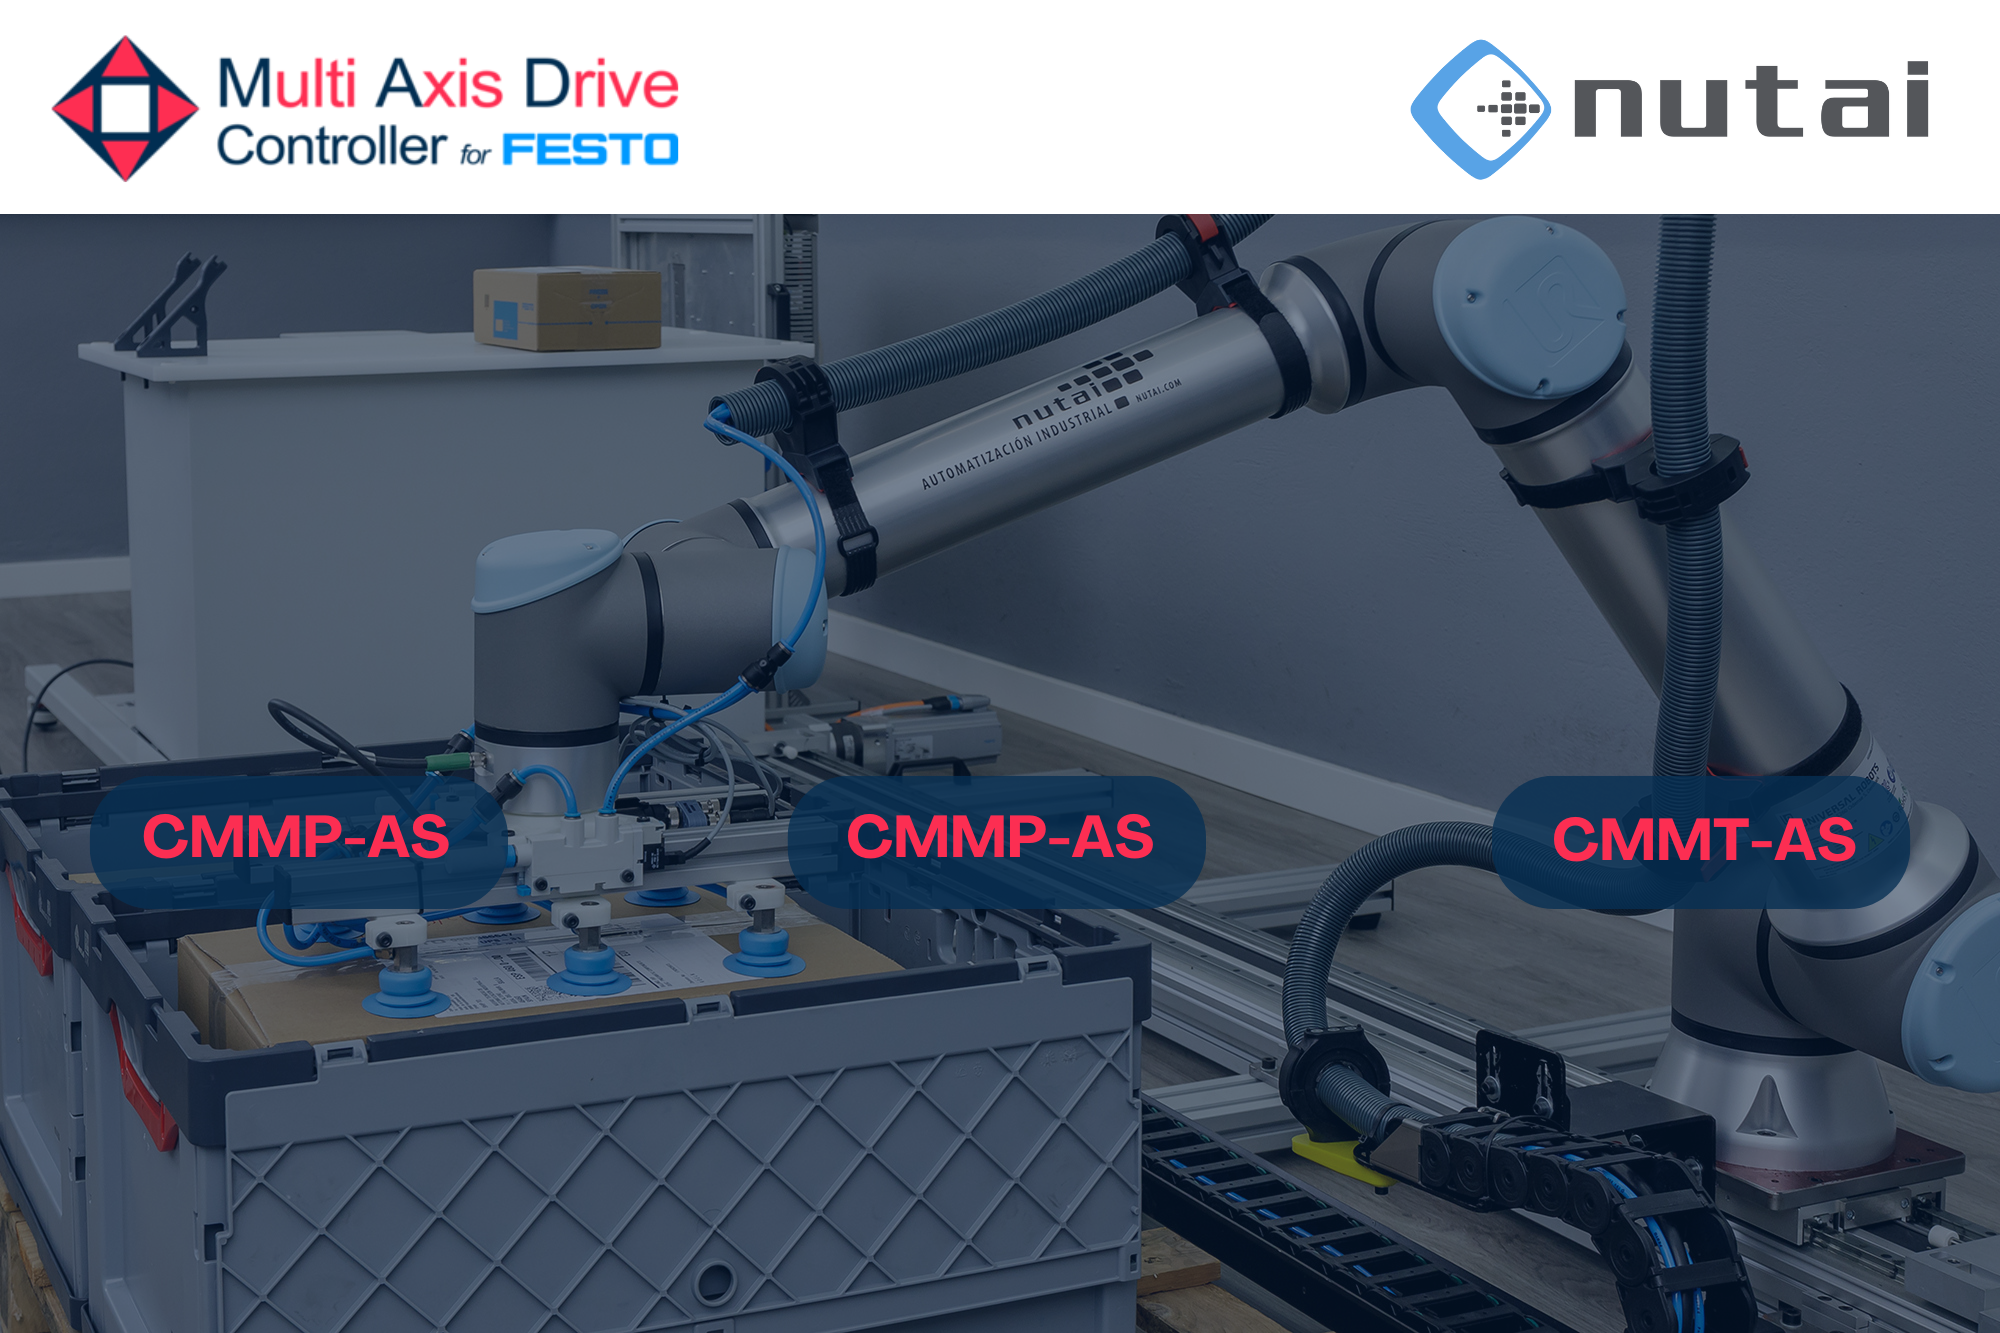 With MAD Controller you can control external axes of Festo (such as CMMT-AS, CMMP-AS, and CMMT-ST) from Universal Robots collaborative robots